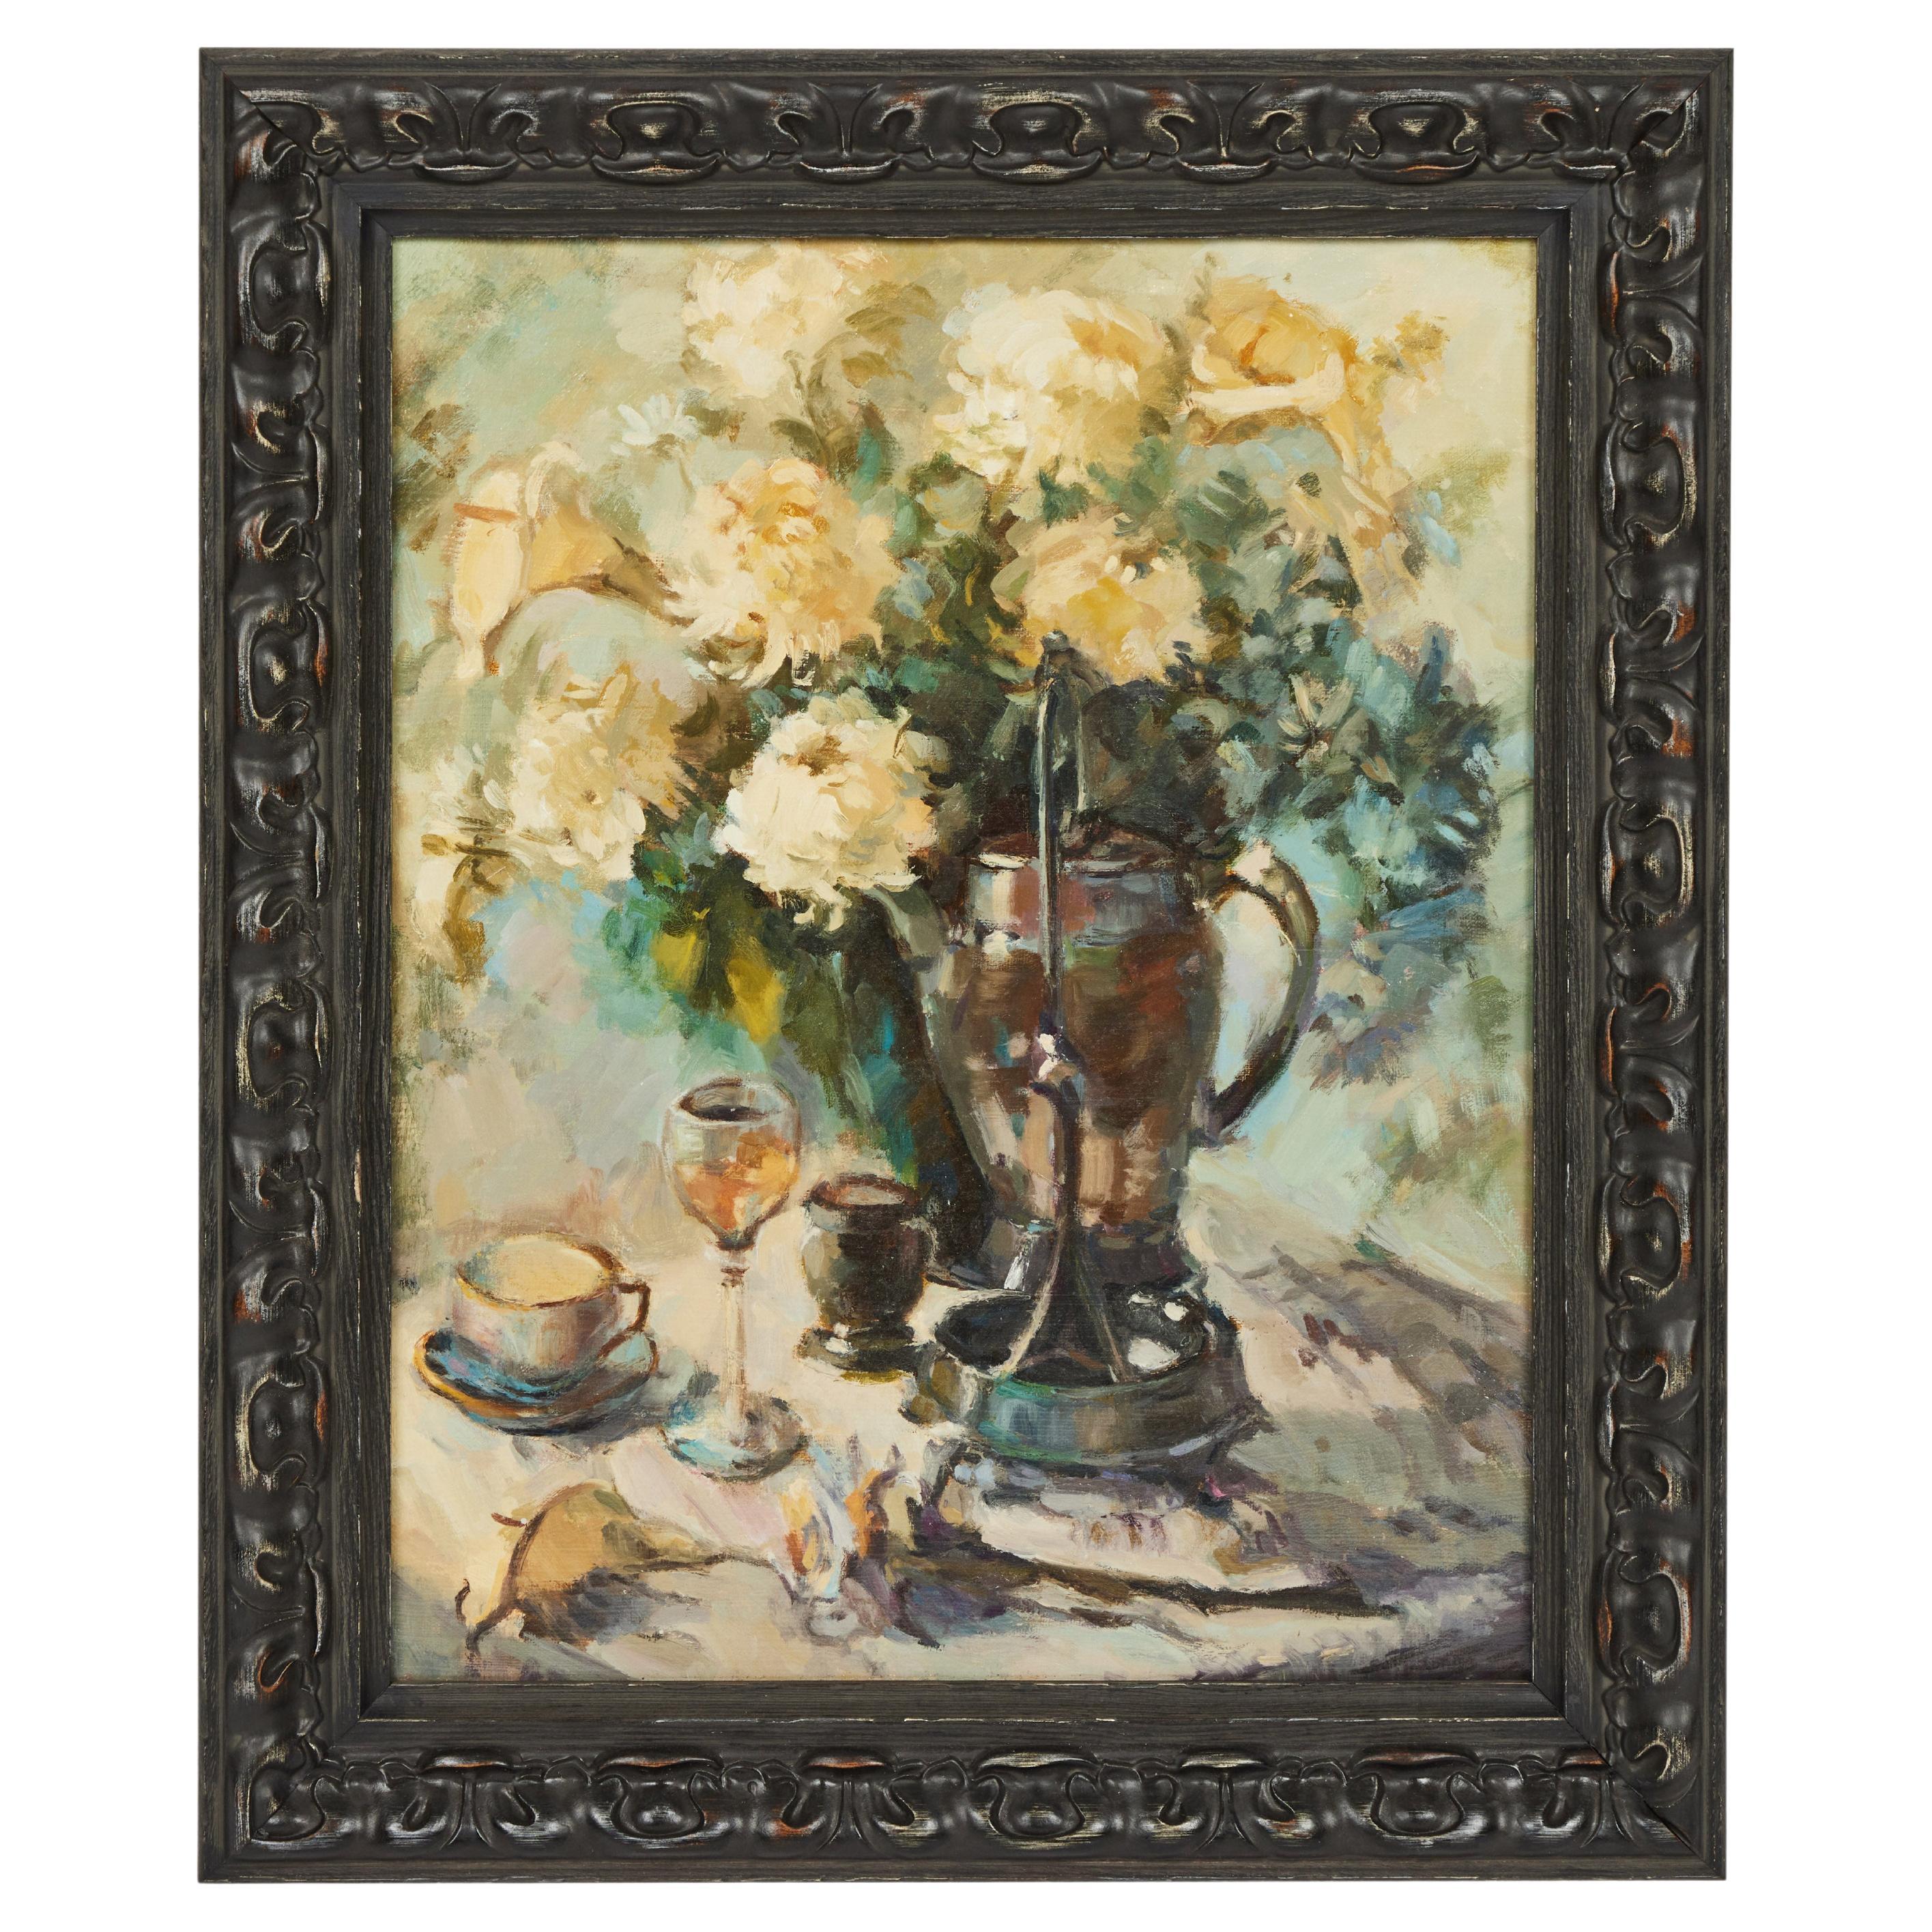 Vintage Oil Painting of Floral Still Life